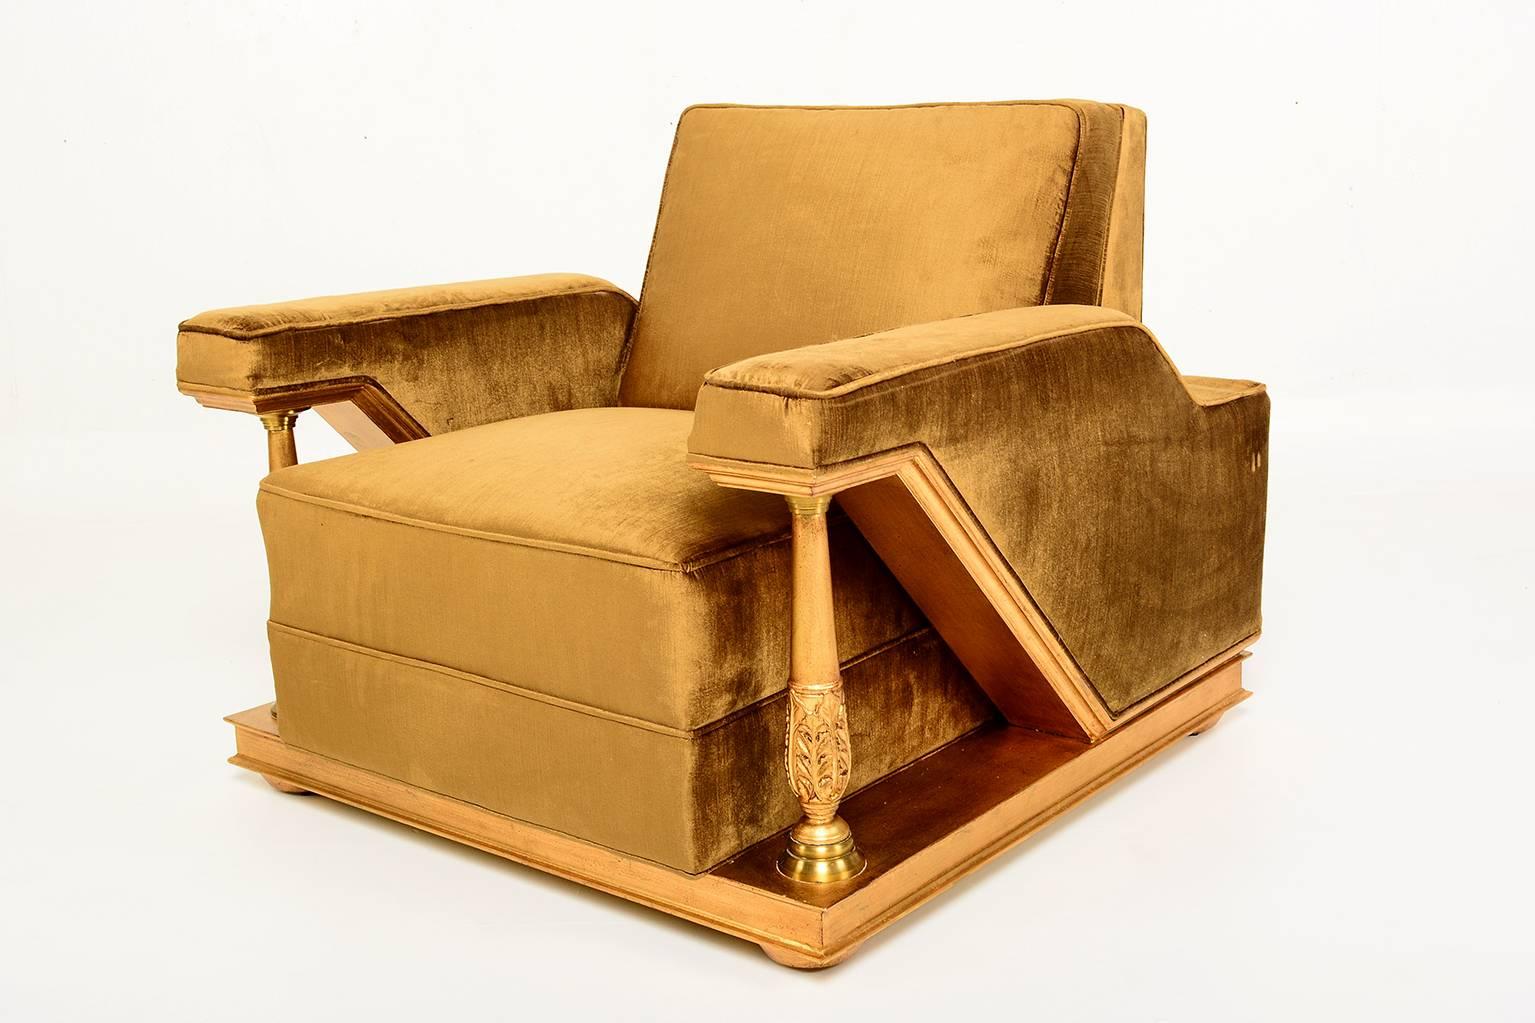 For your consideration a pair amazing chairs designed by Octavio Vidales for Muebles Johrvy. 

Solid mahogany wood frame finished in gold leaf with bronze supports on the front with bonze casters. 

New upholstery y sage/ olive green velvet.